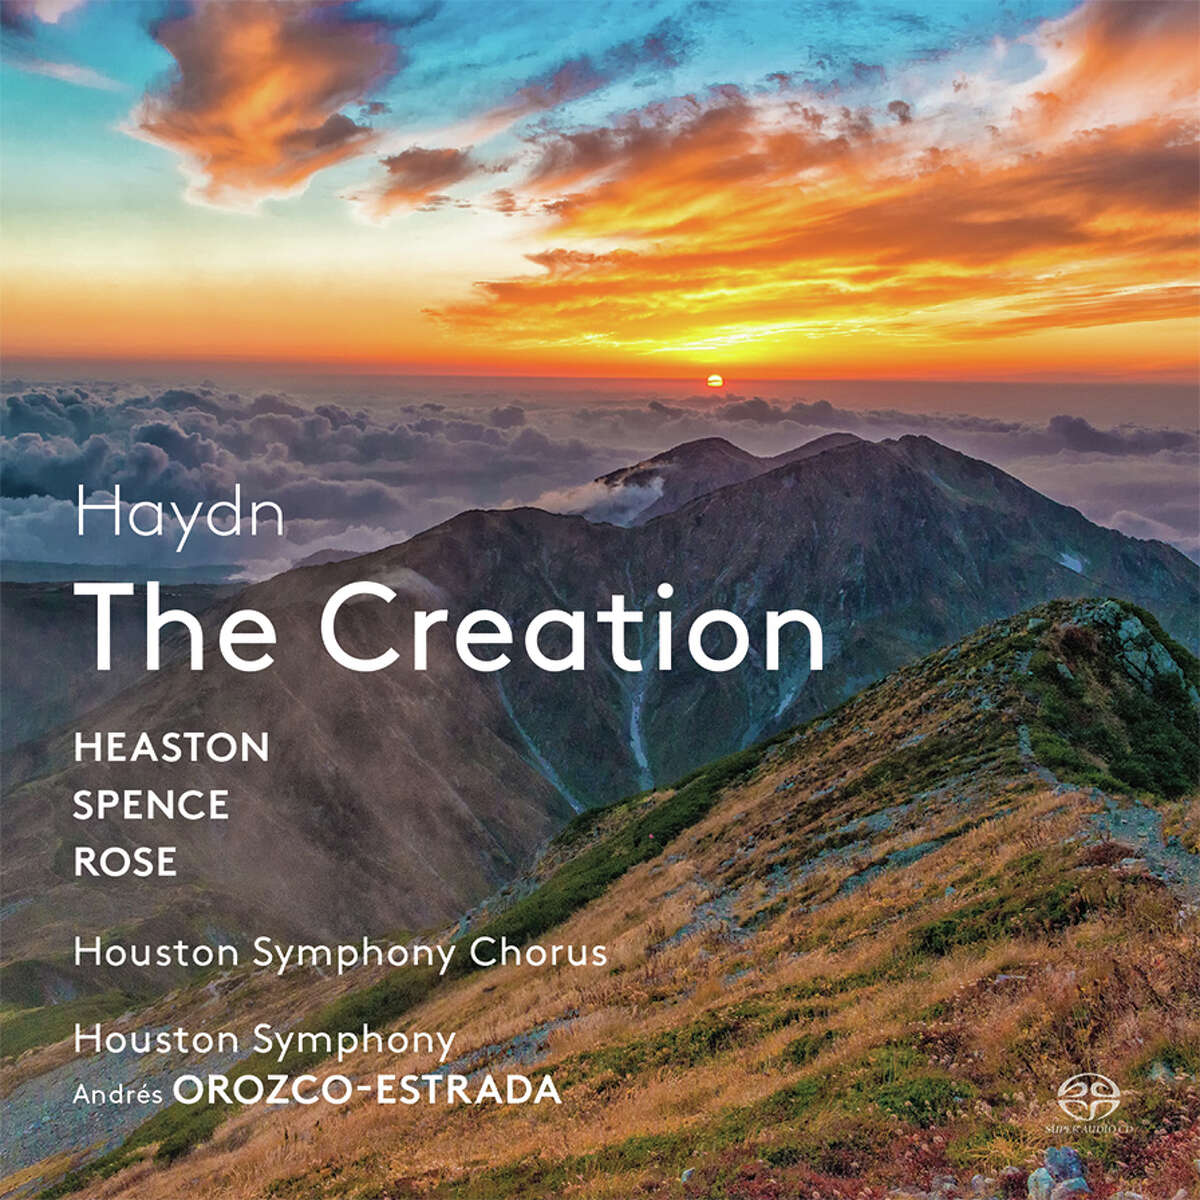 Houston Symphony's newly released CD album, "Haydn--The Creation," out on Pentatone.